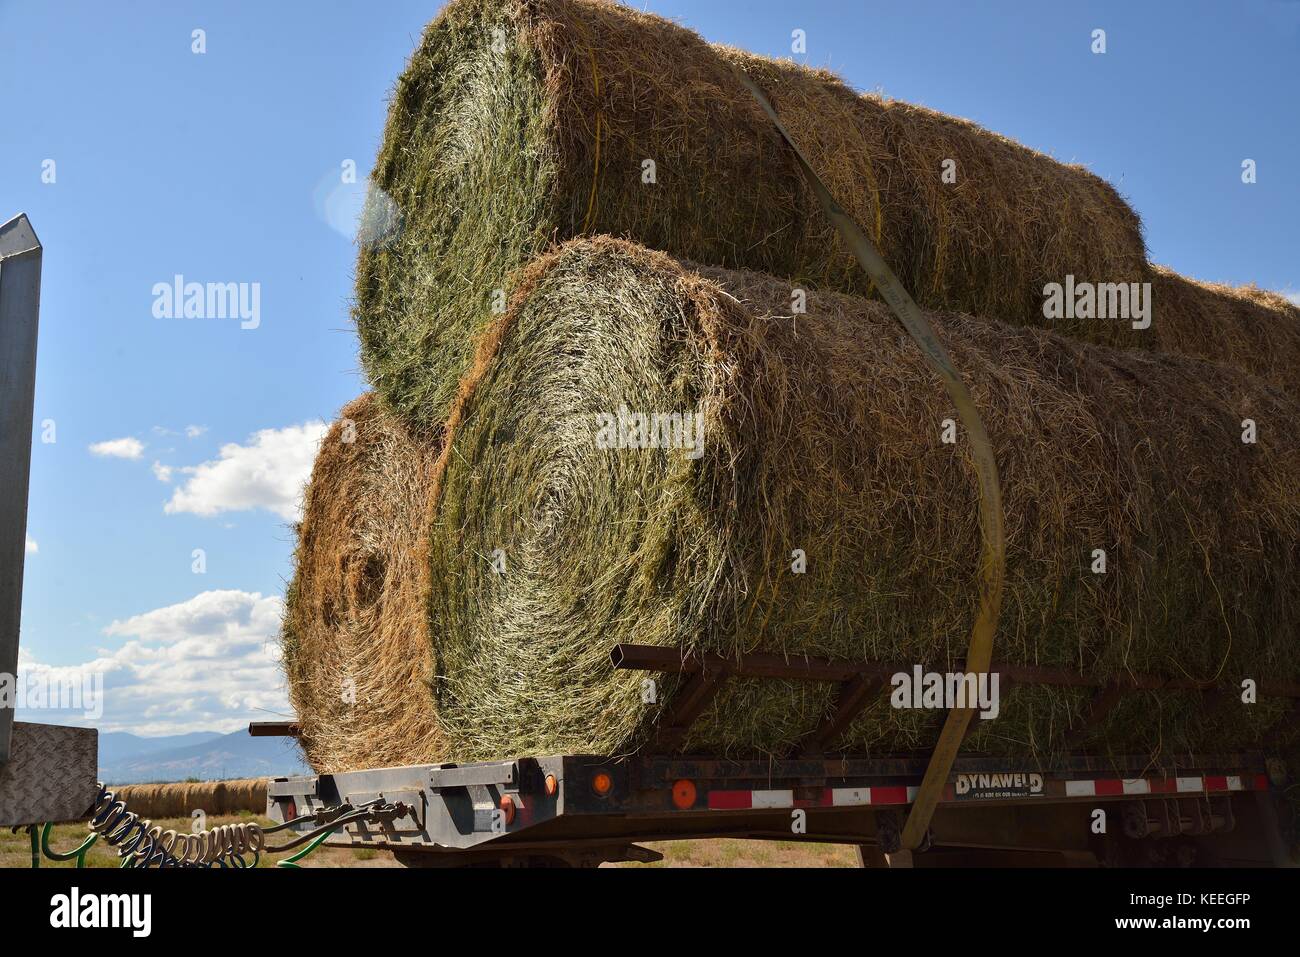 Round Bales of Hay, ready for transport Stock Photo